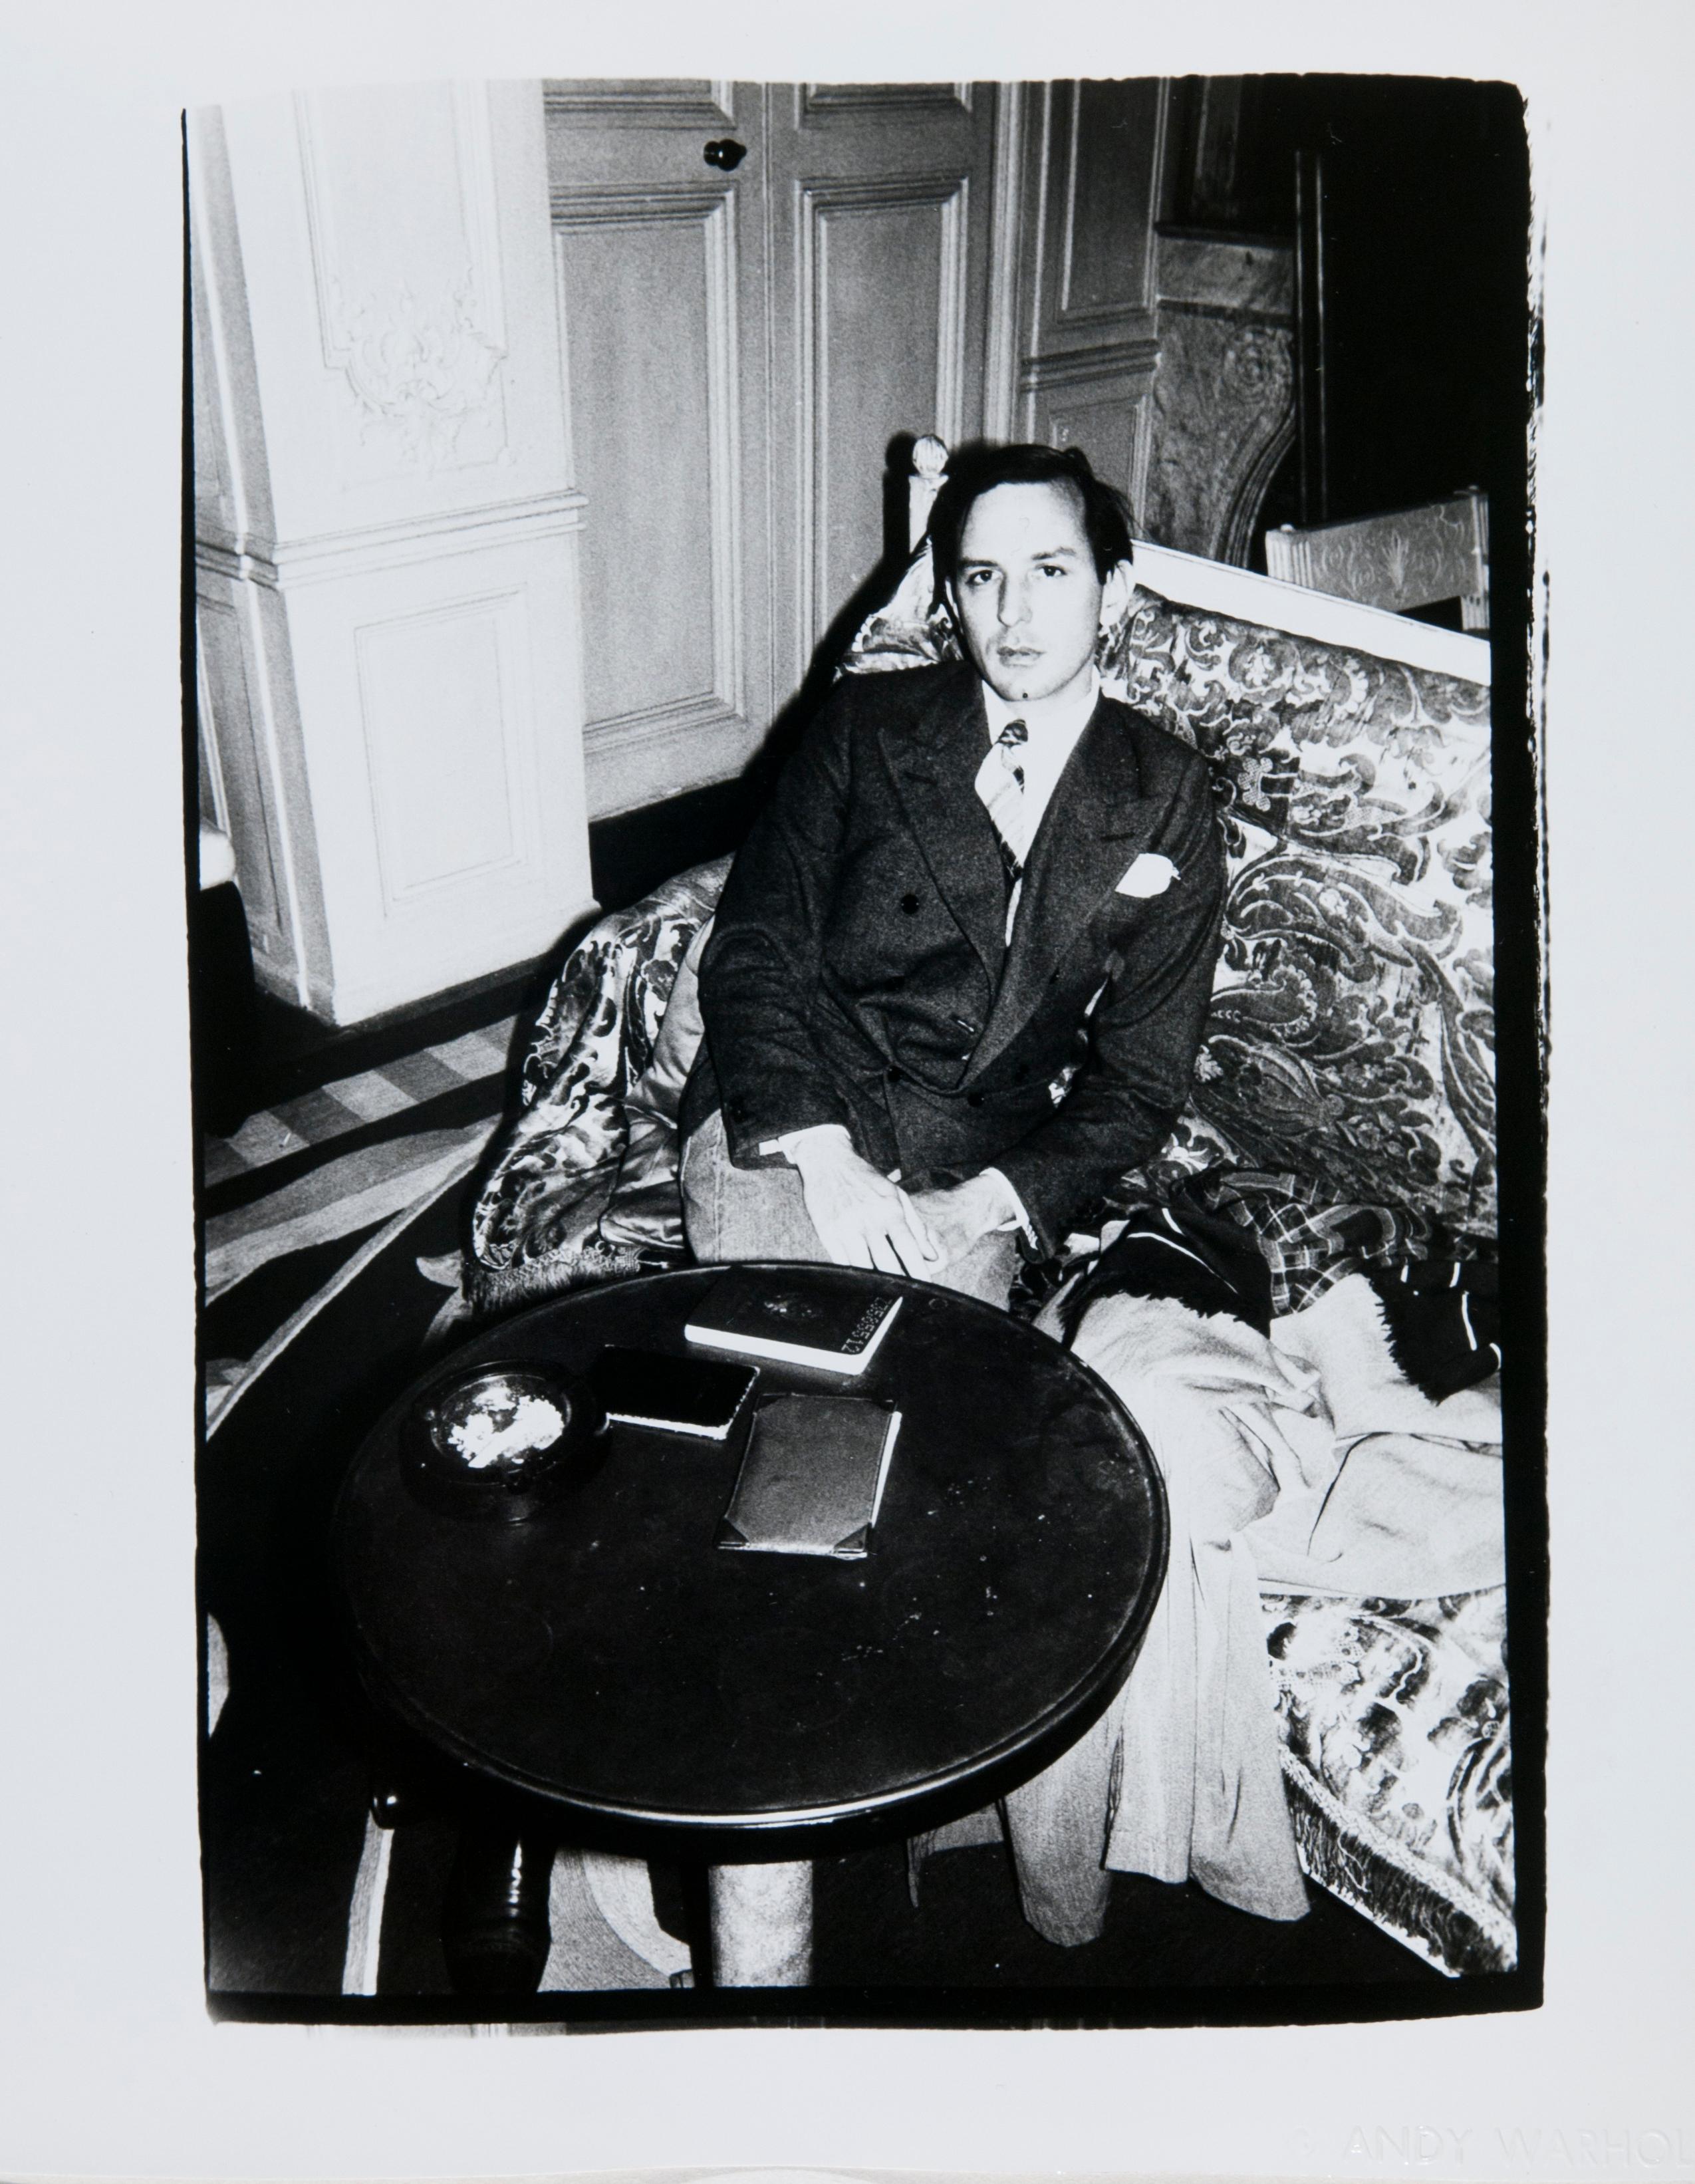 Andy Warhol Portrait Photograph - Photograph of Fred Hughes Seated at a Table